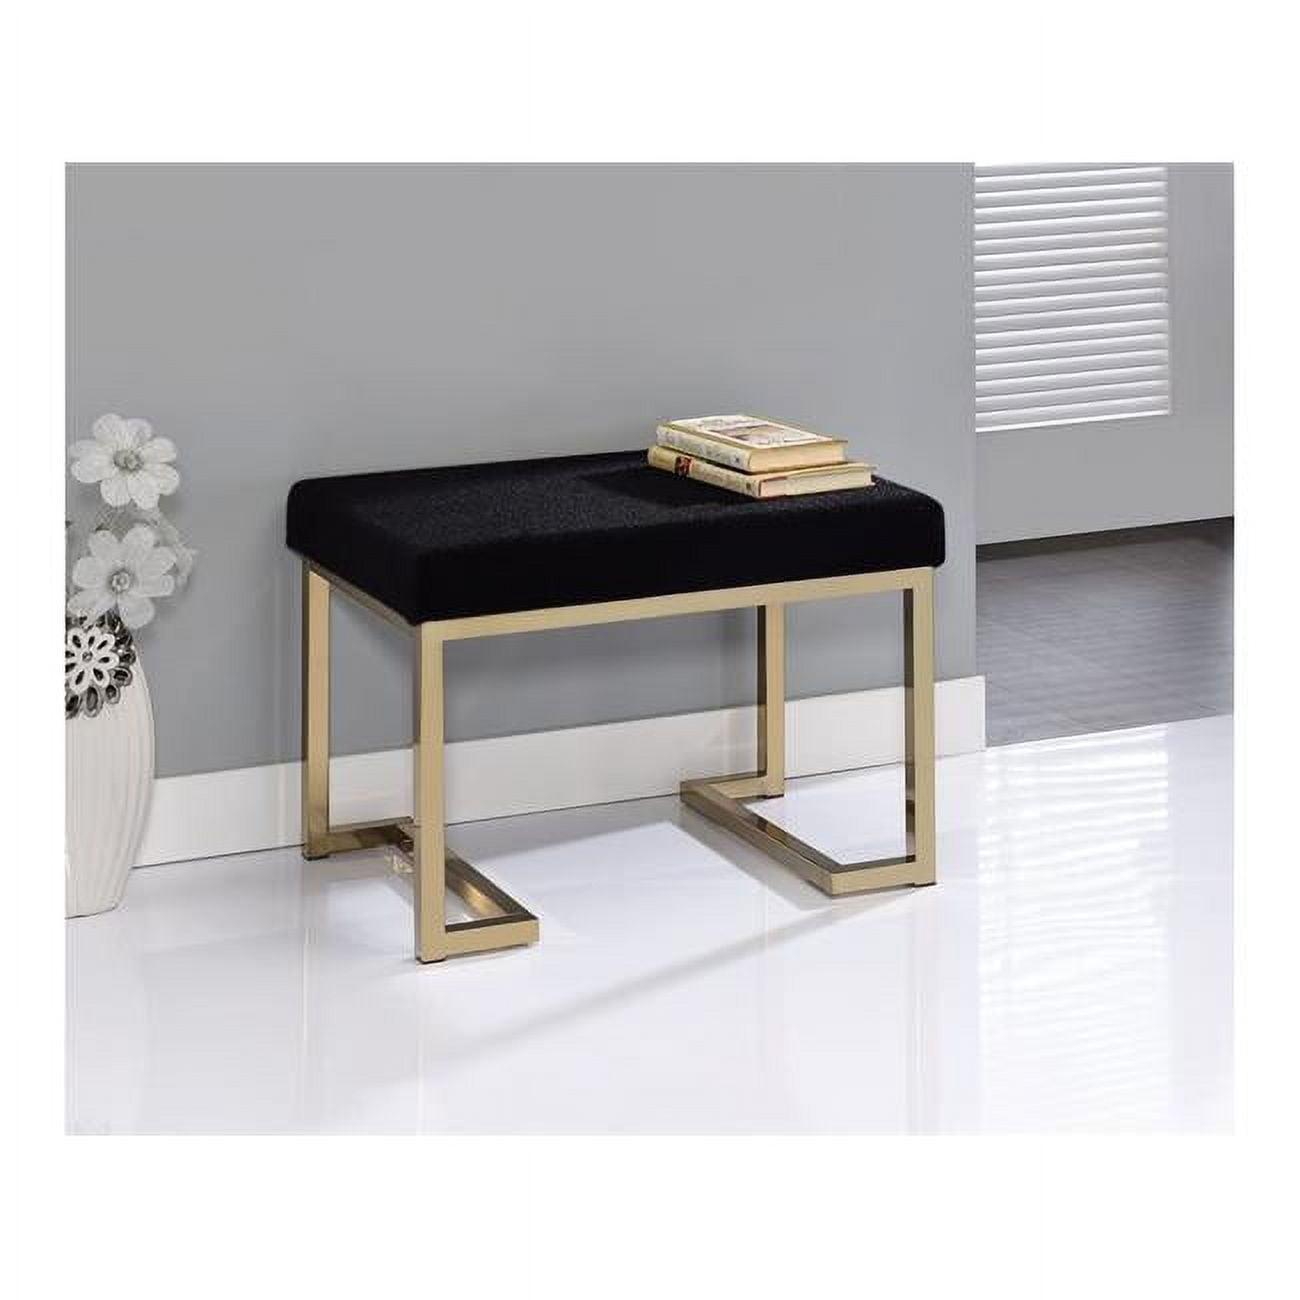 Champagne Gold & Black Fabric Padded Footstool